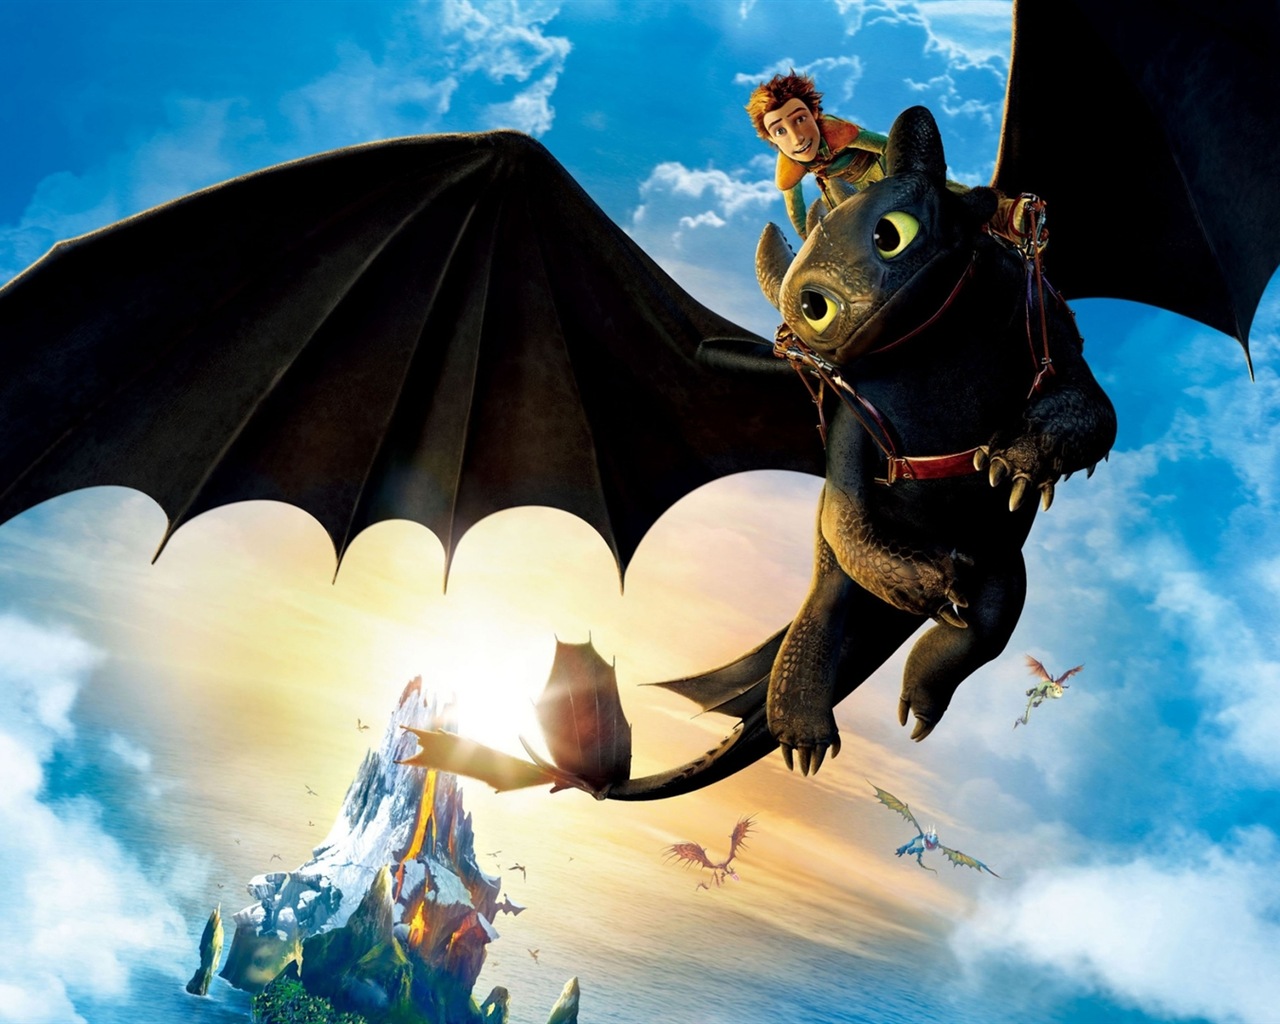 How to Train Your Dragon 2 驯龙高手2 高清壁纸1 - 1280x1024